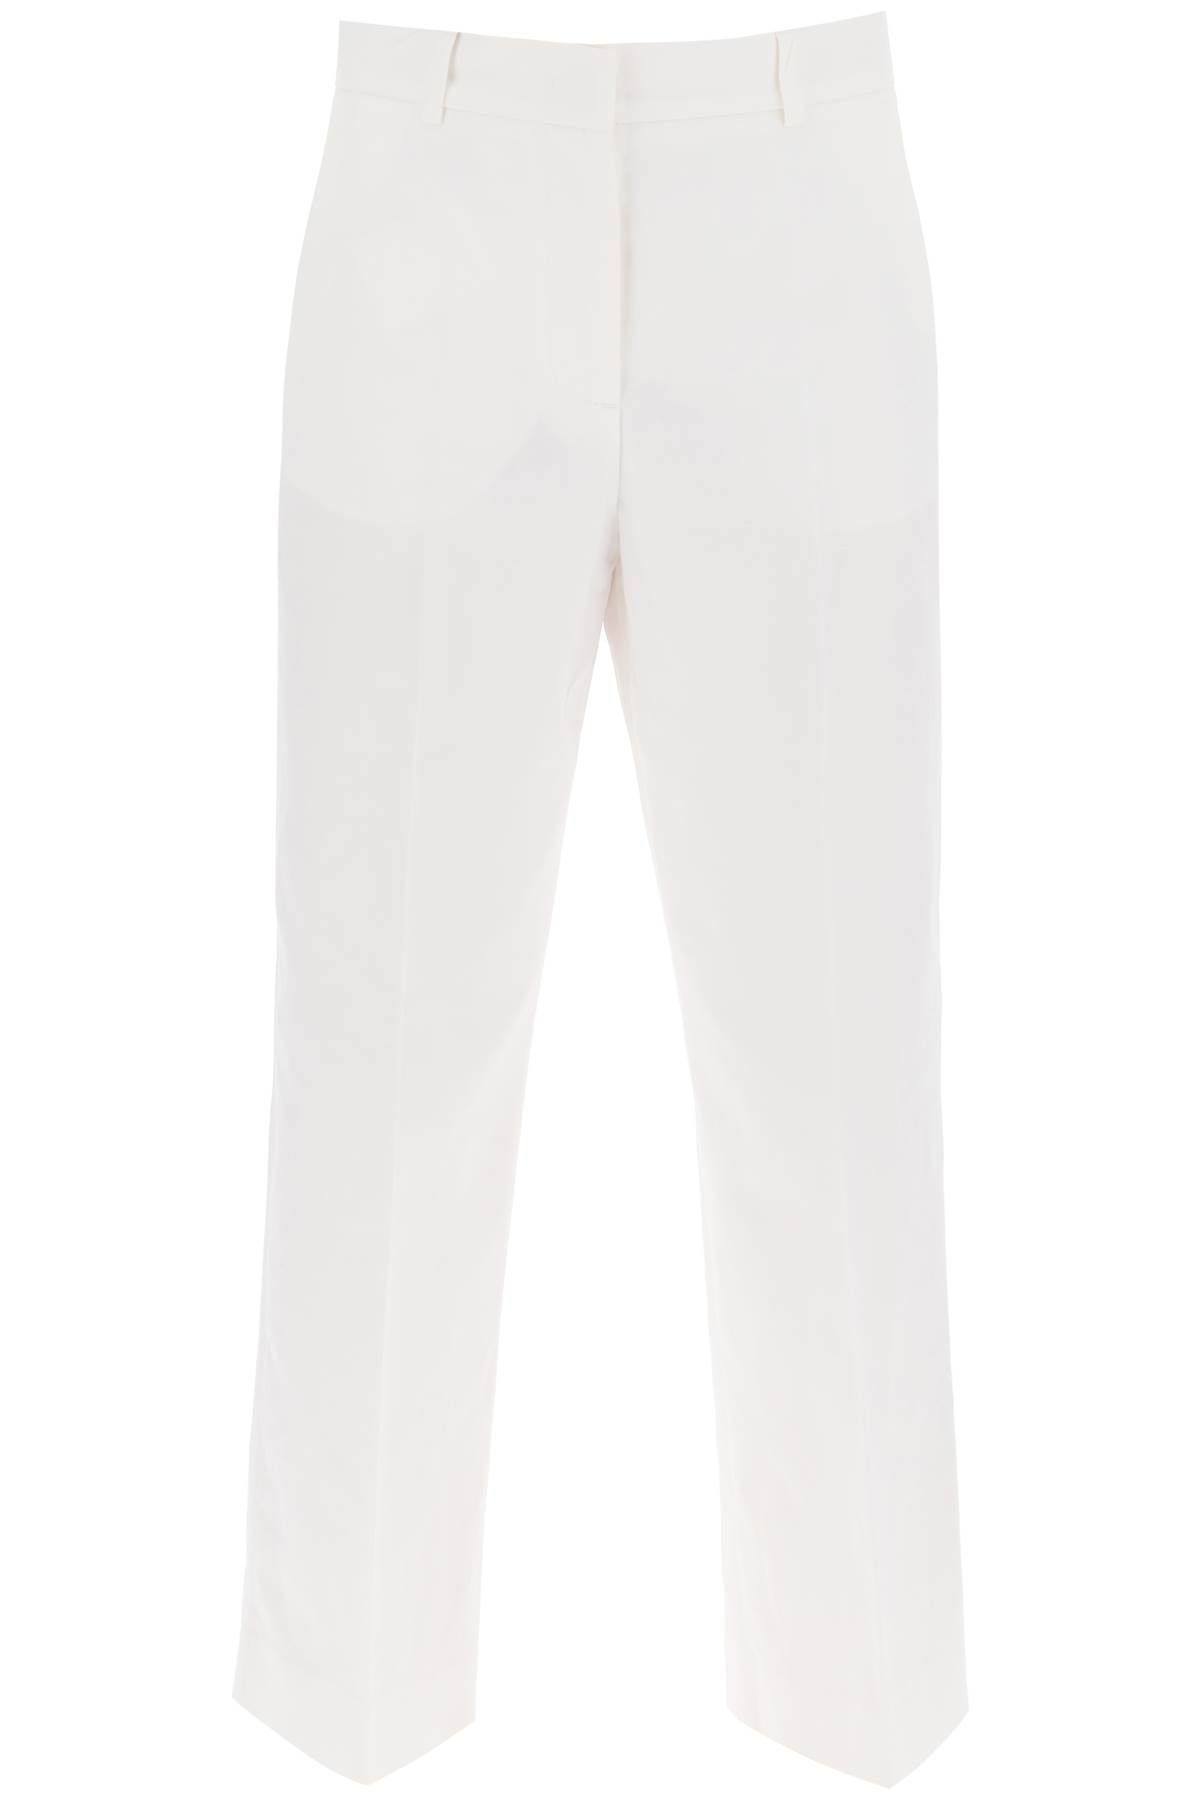 Weekend Max Mara Cotton Tailored Trousers In White